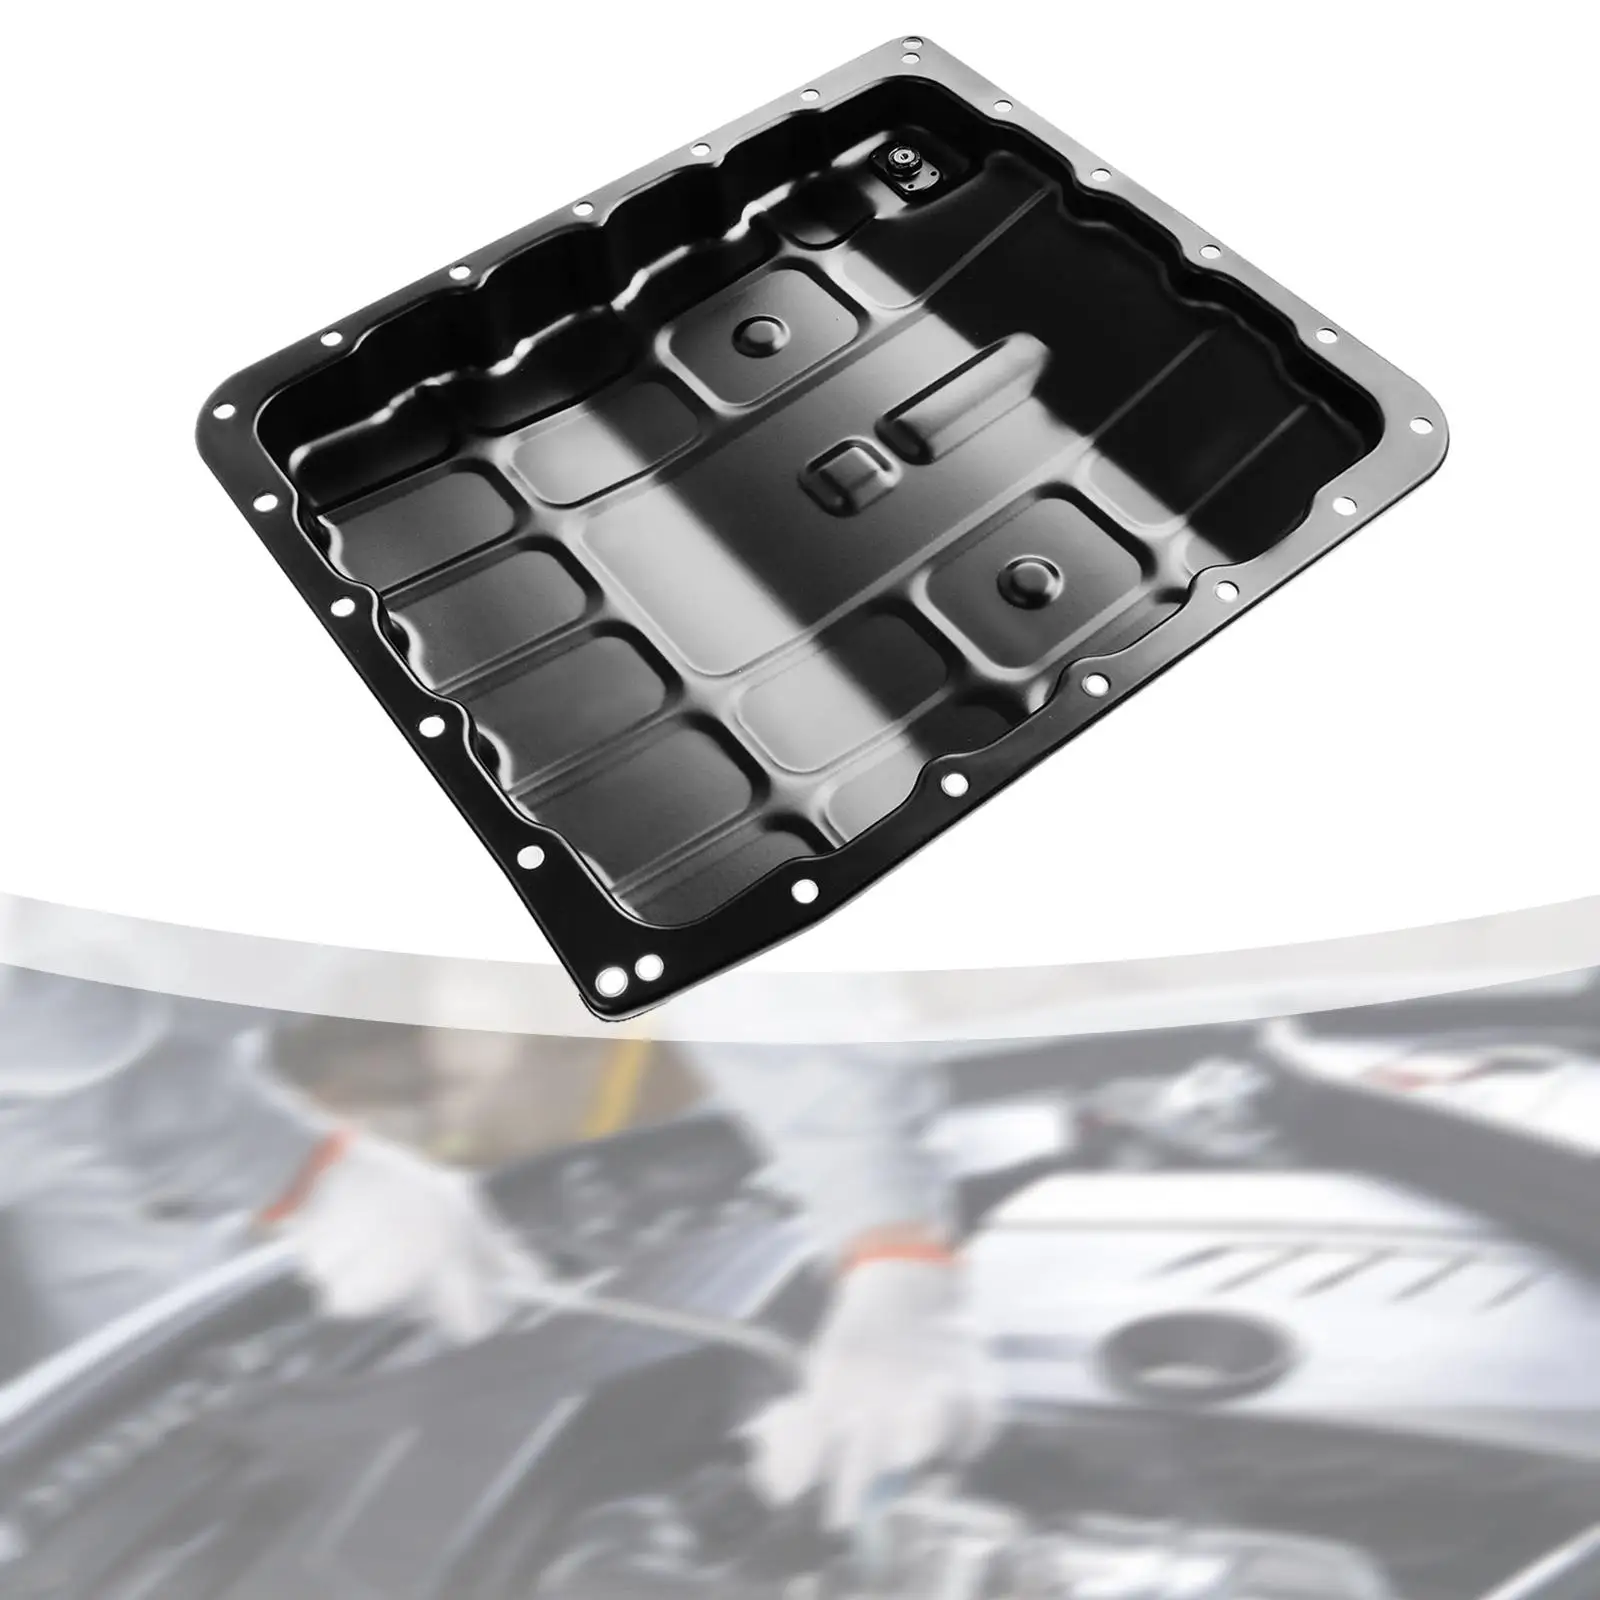 Transmission Oil Pan 3139090x0B Supplies Stable Performance Direct Replaces Car for Nissan Pathfinder Titan Armada Frontier